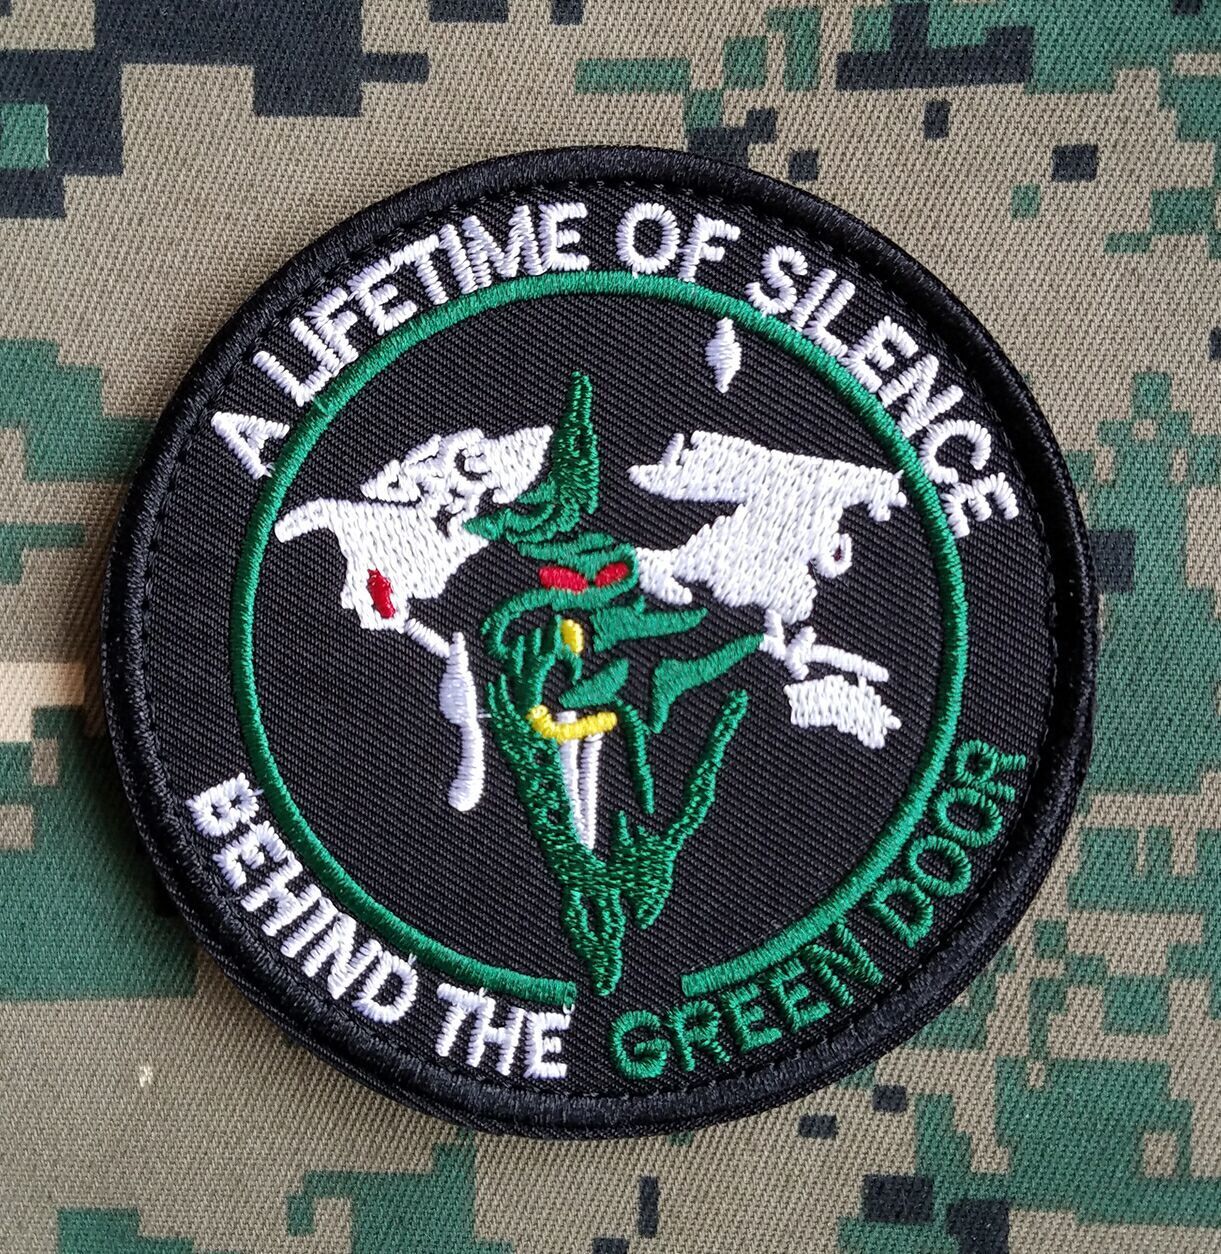 A LIFETIME OF SILENCE BEHIND THE GREEN DOOR TACTICAL EMBROIDERED HOOK PATCH *01